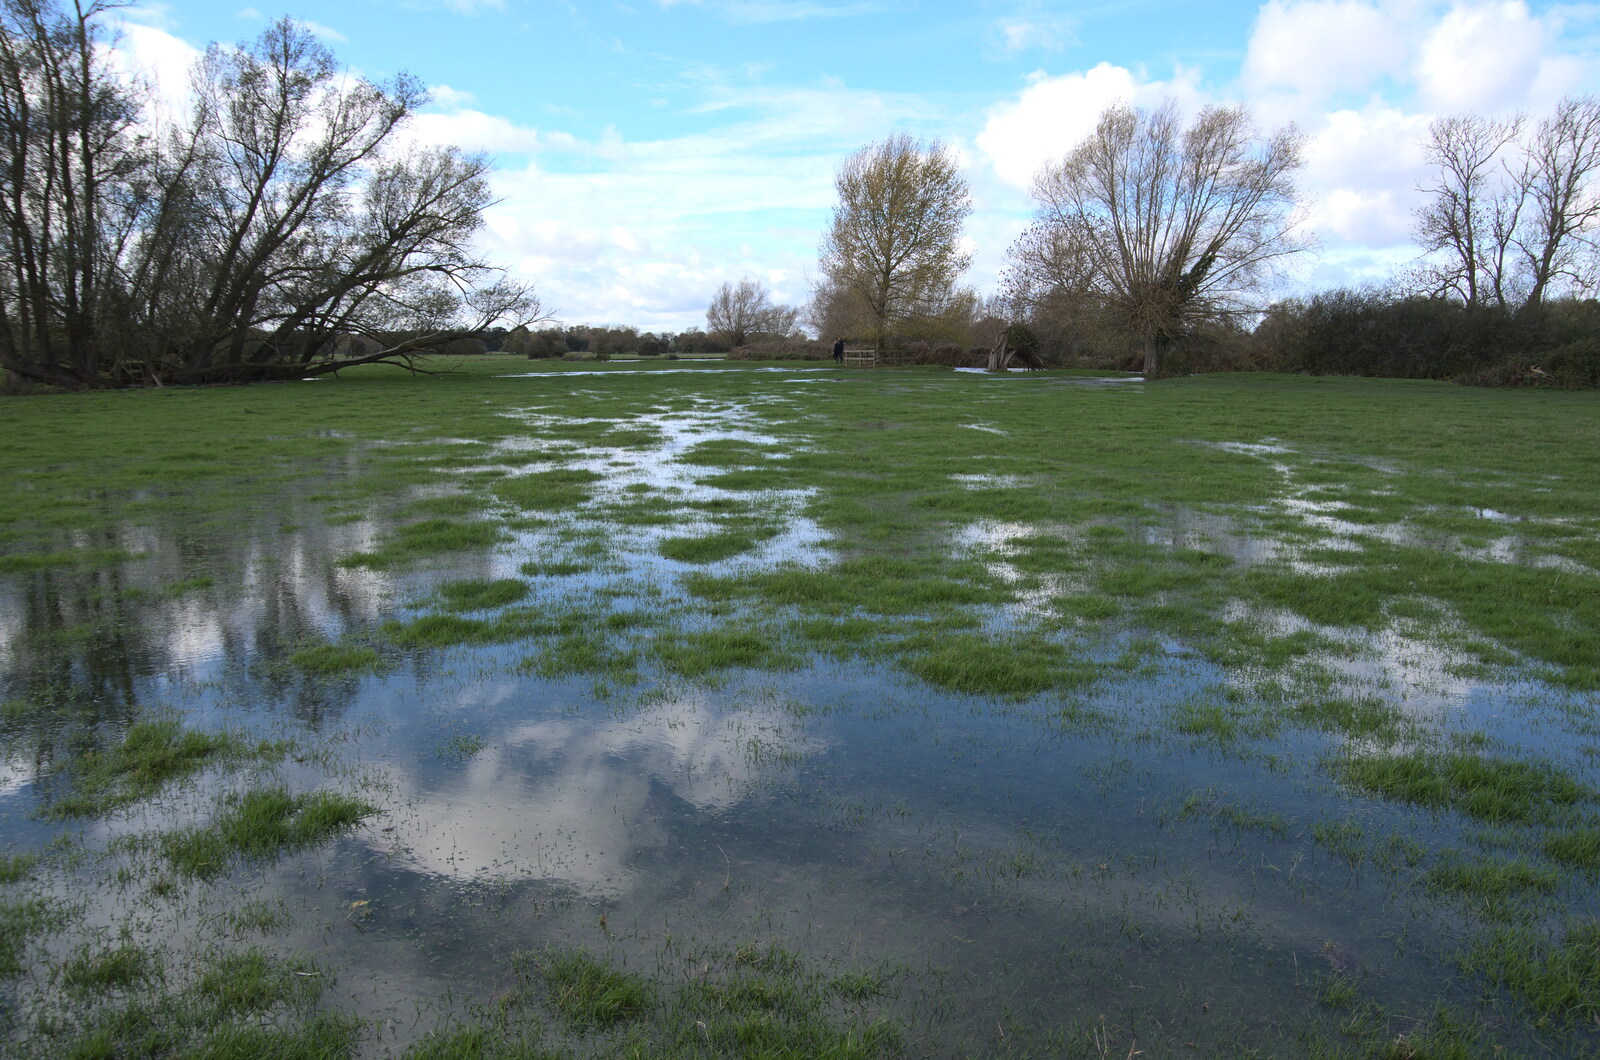 A Postcard from Flatford and Dedham, Suffolk and Essex, 9th November 2022: The field on the walk to Dedham is flooded